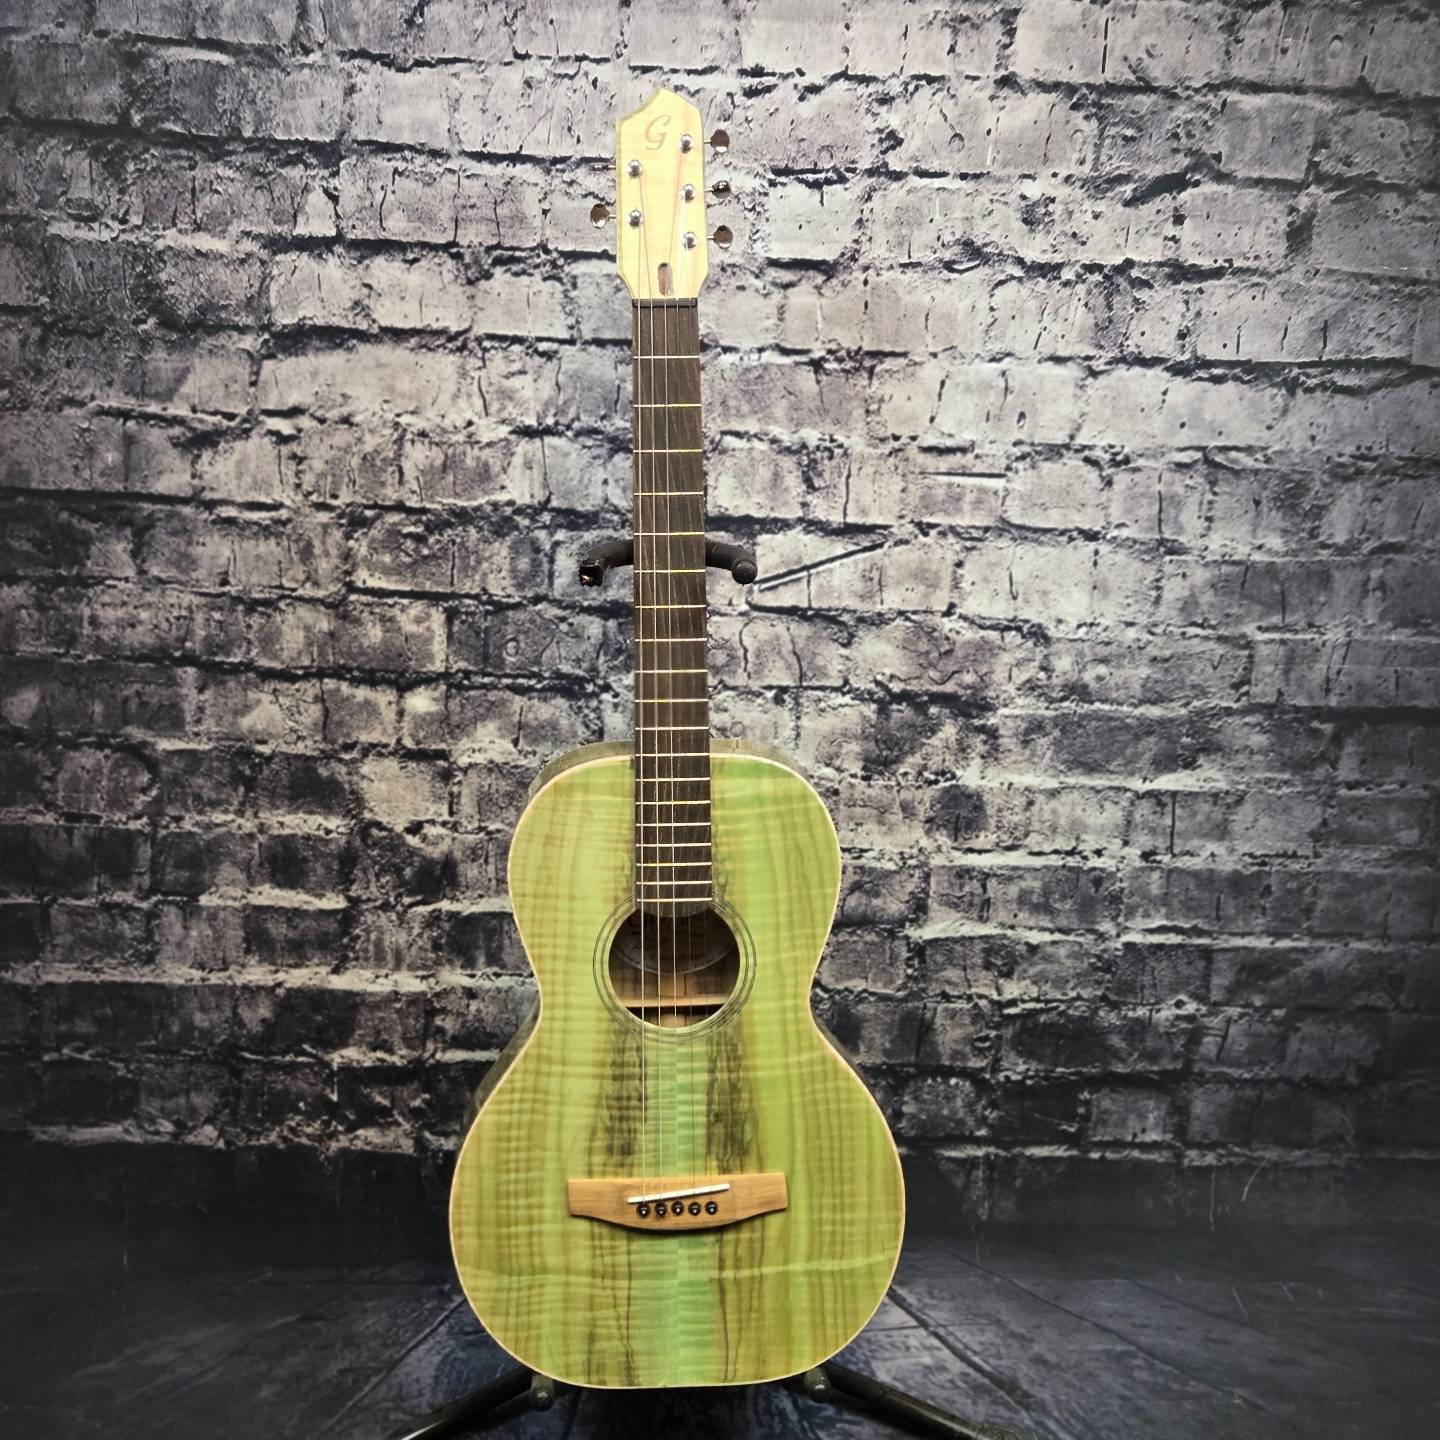 A total experiment in both colour and design. The idea came from a @jacobcollier video. Alternate tuning 5 string acoustic. This Gilmore Parlor Suze is constructed of locally harvested Laurel Leaf Willow. Spanish Cedar neck with an ebonized locally h